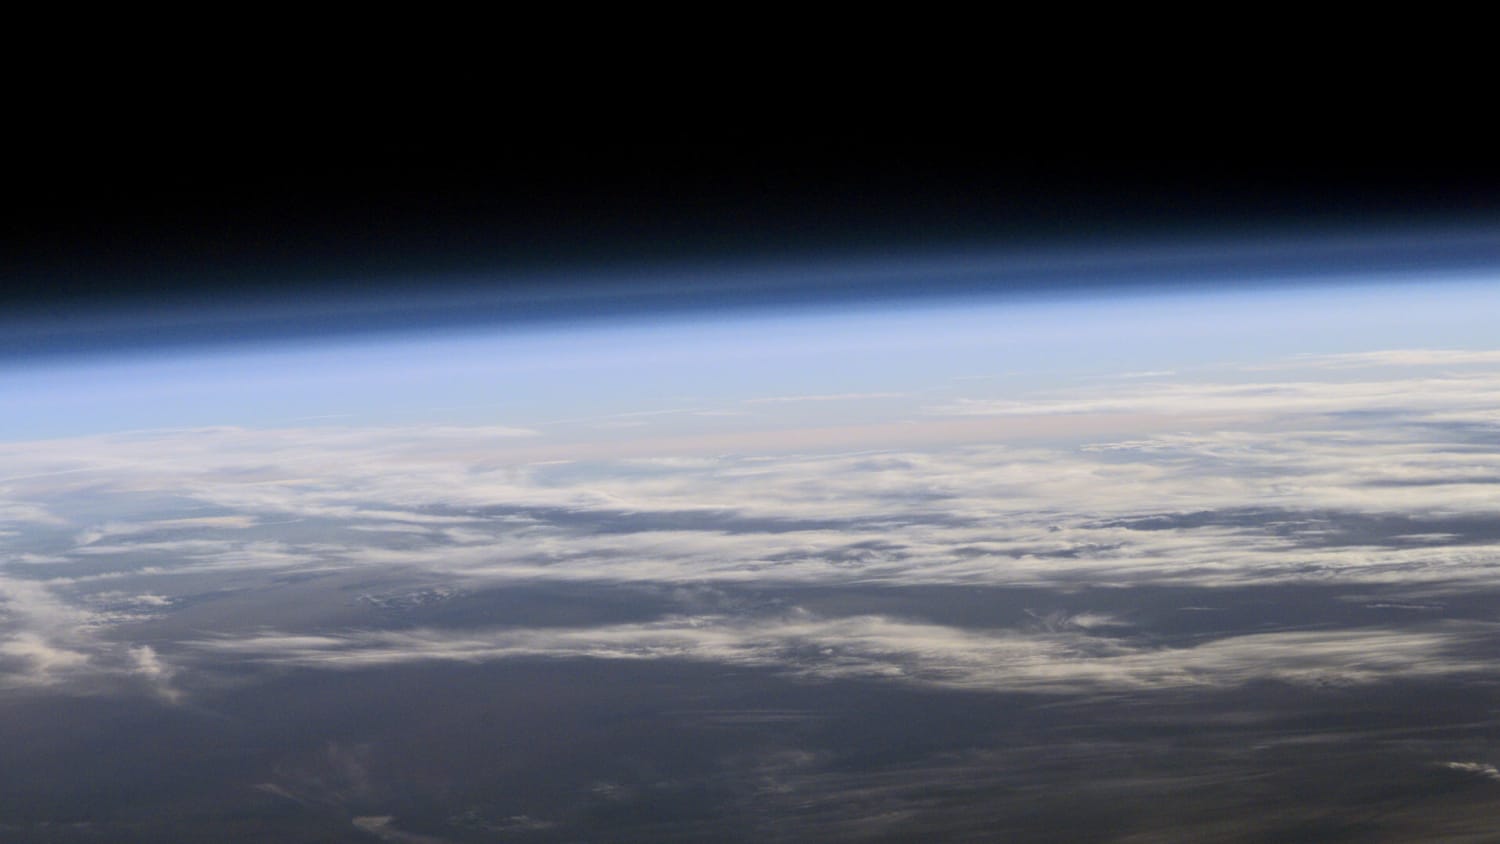 NASA data aids ozone hole's journey to recovery